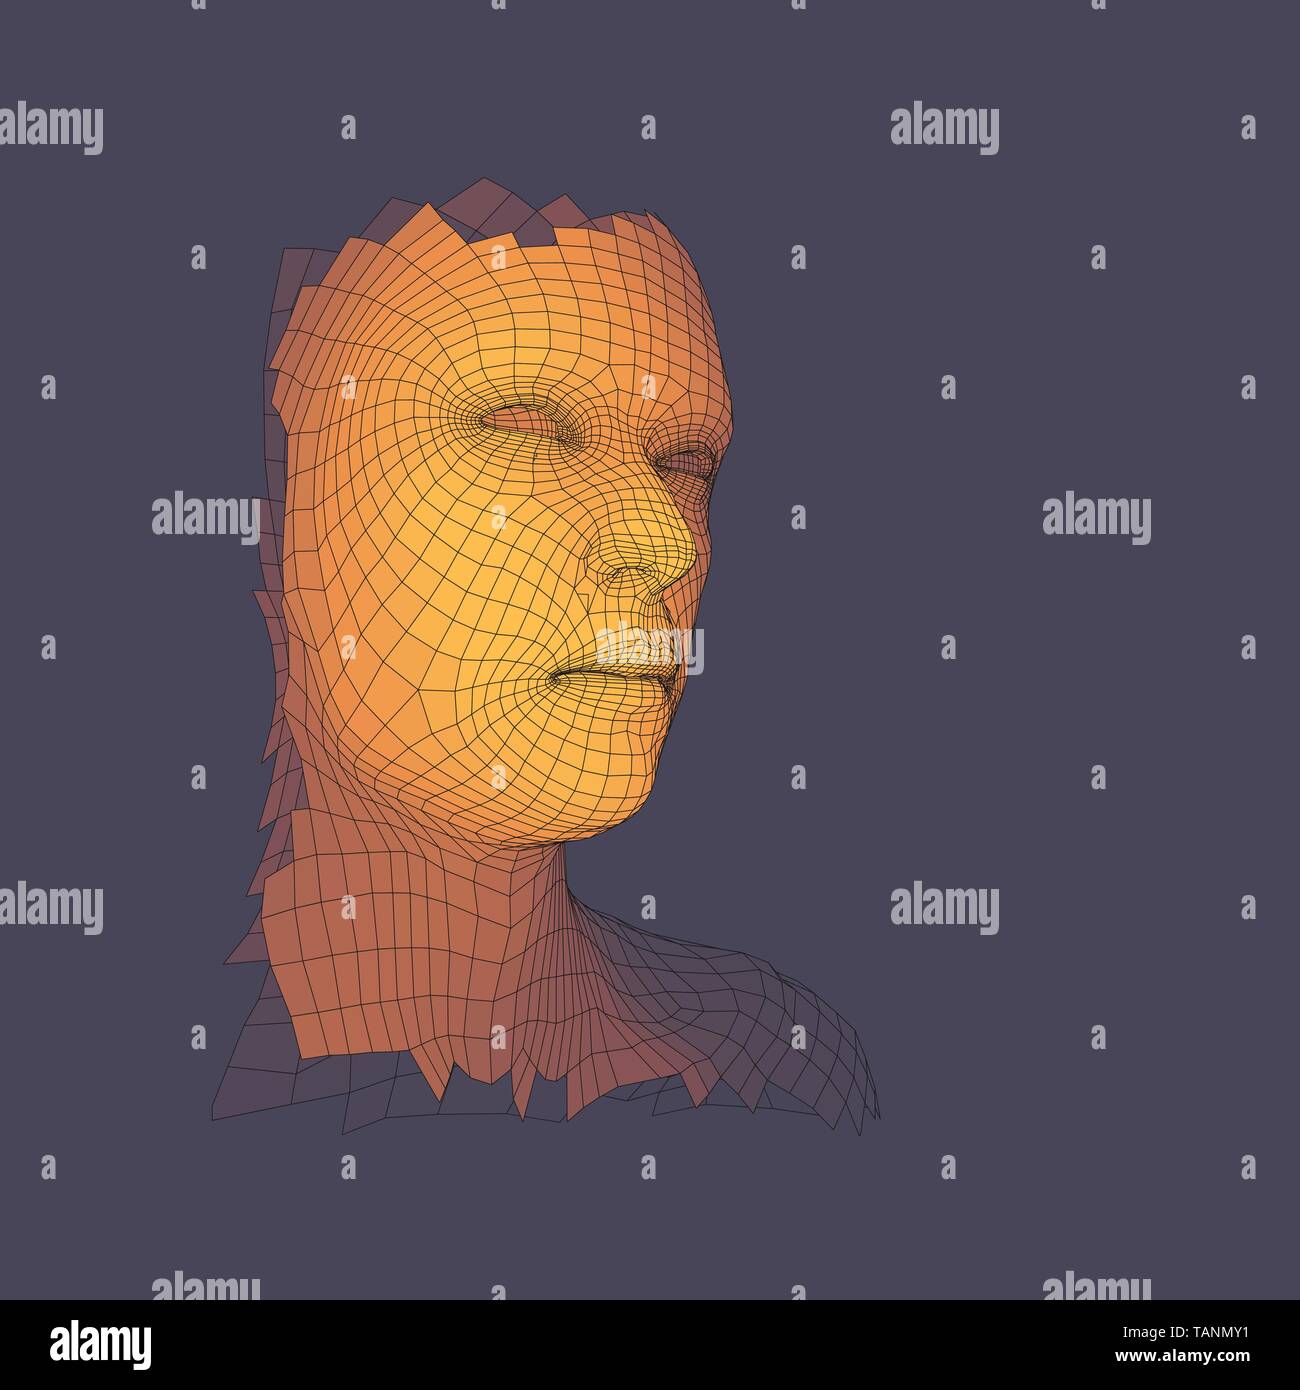 Head of the Person from a 3d Grid. Human Head Wire Model. Face Scanning. View of Human Head. 3D Geometric Face Design. Polygonal Covering Skin. Vector Stock Vector